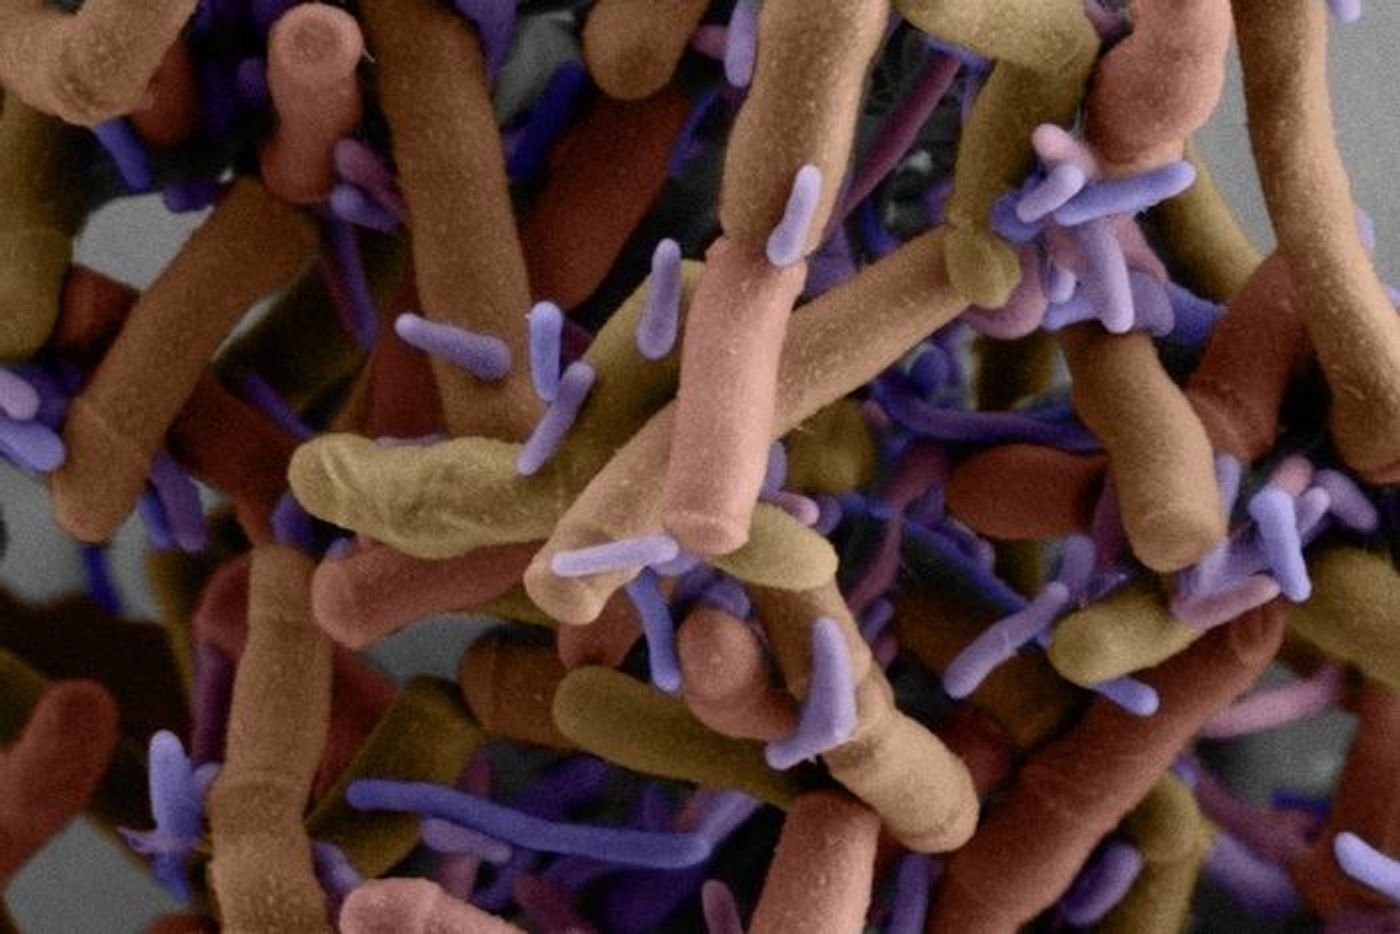 A scanning electron micrograph shows small purple Patescibacteria cells growing on the surface of much larger cells. These epibiotic bacteria are Southlakia epibionticum. / Credit: Yaxi Wang, Wai Pang Chan and Scott Braswell/University of Washington